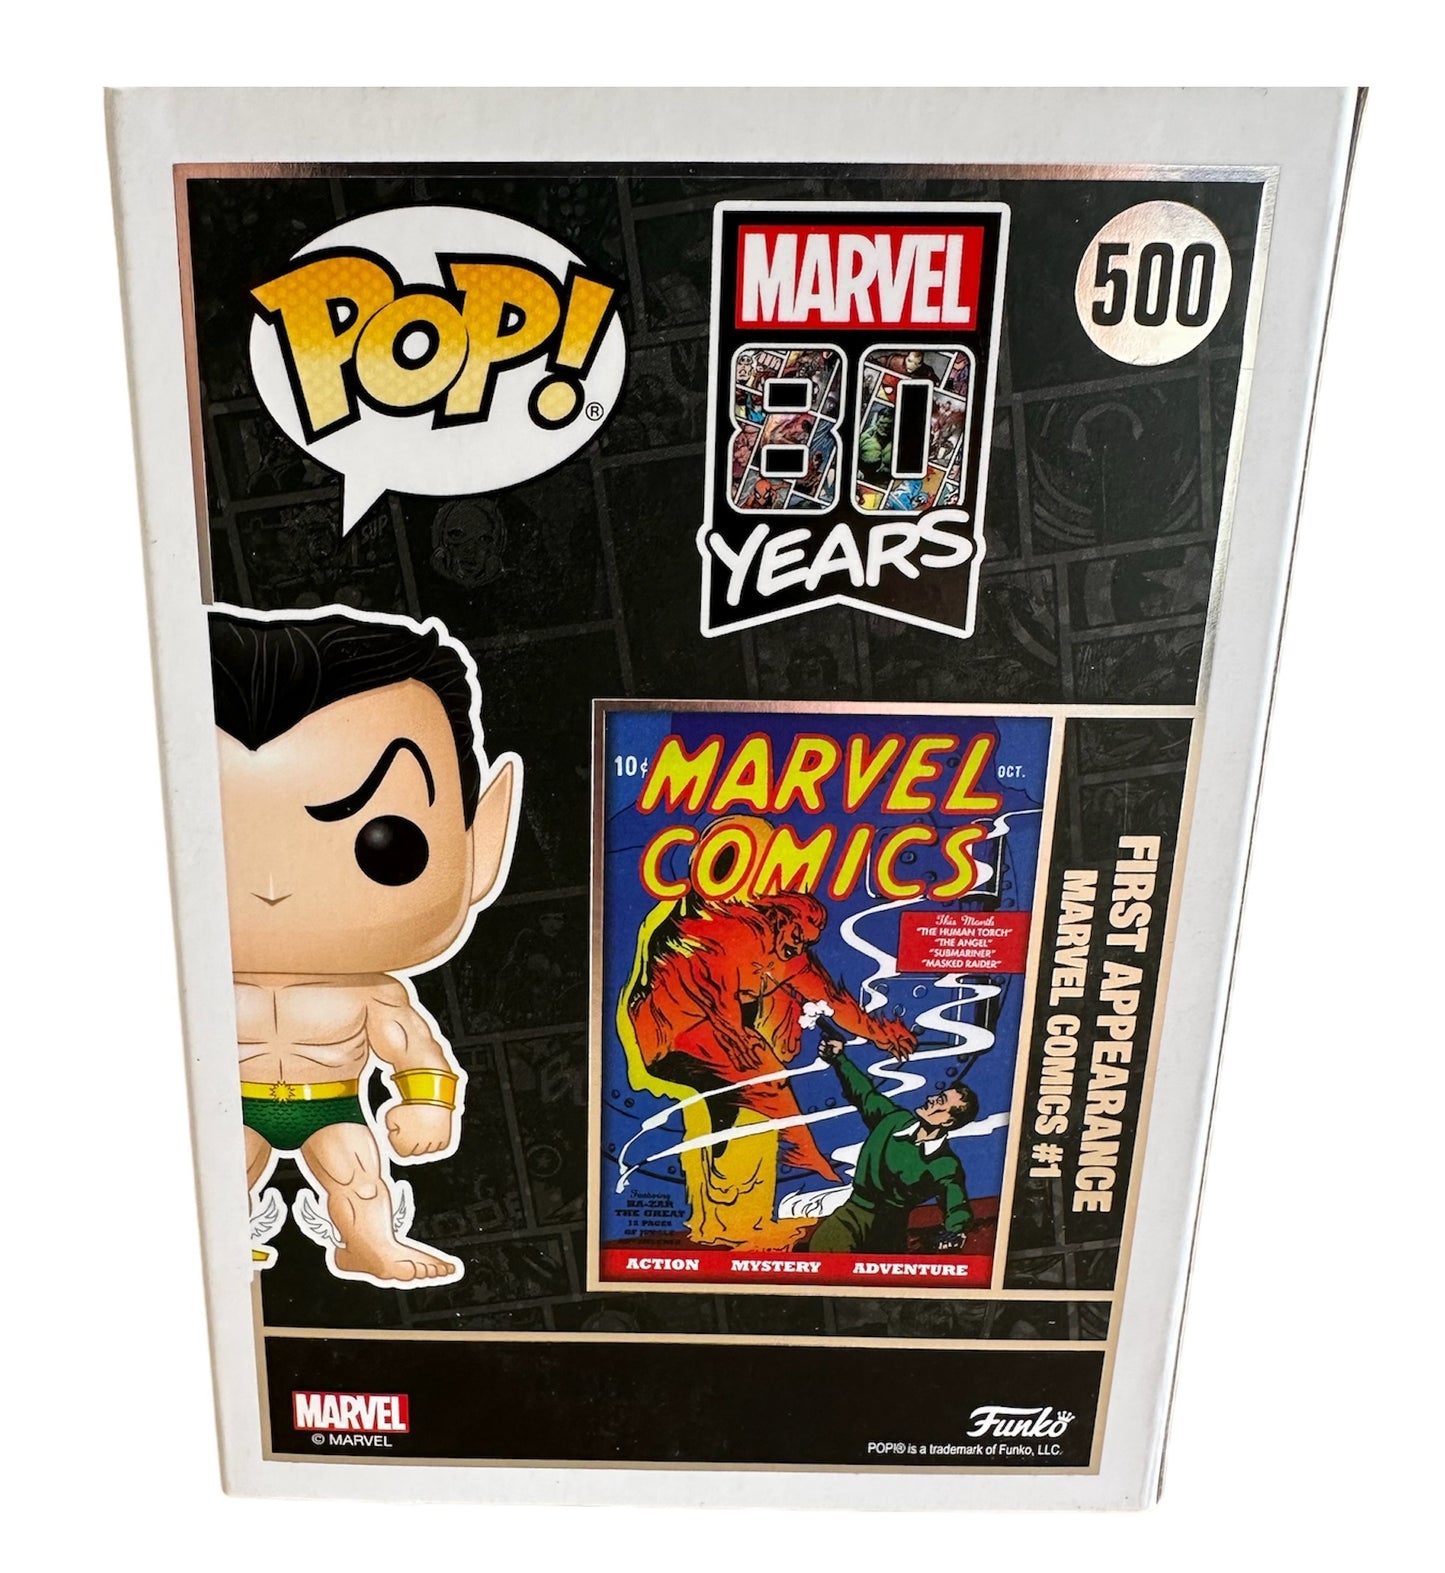 POP! 2019 Marvels 80 Years First Appearance Funko Pop Vinyl Figure - Namor, The Sub-Mariner Bobble-Head No. 500 - Brand New Shop Stock Room Find